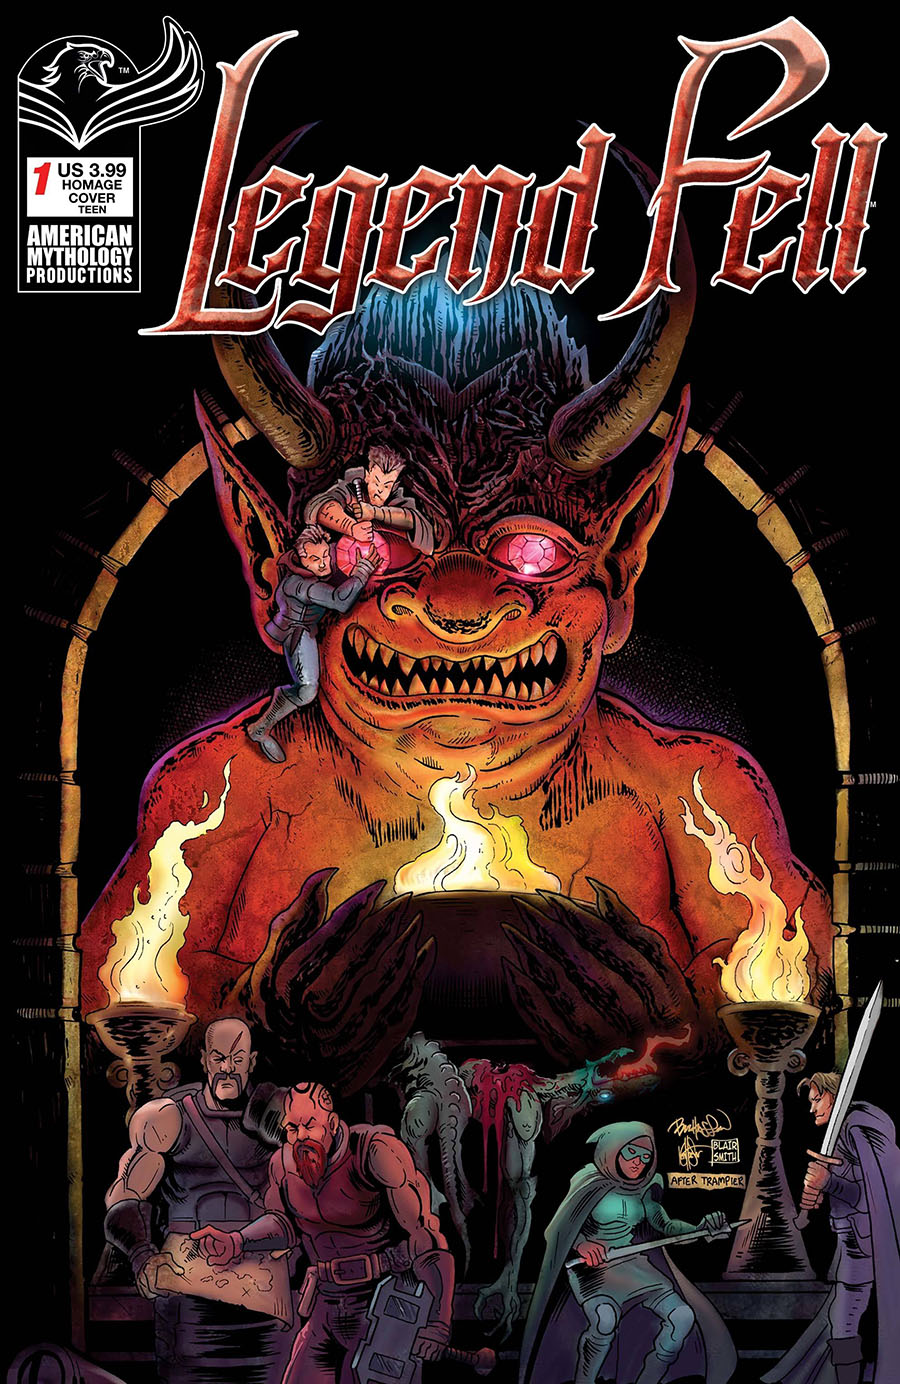 Legend Fell #1 Cover C Variant Buz Hasson & Ken Haeser Dungeons & Dragons Homage Cover